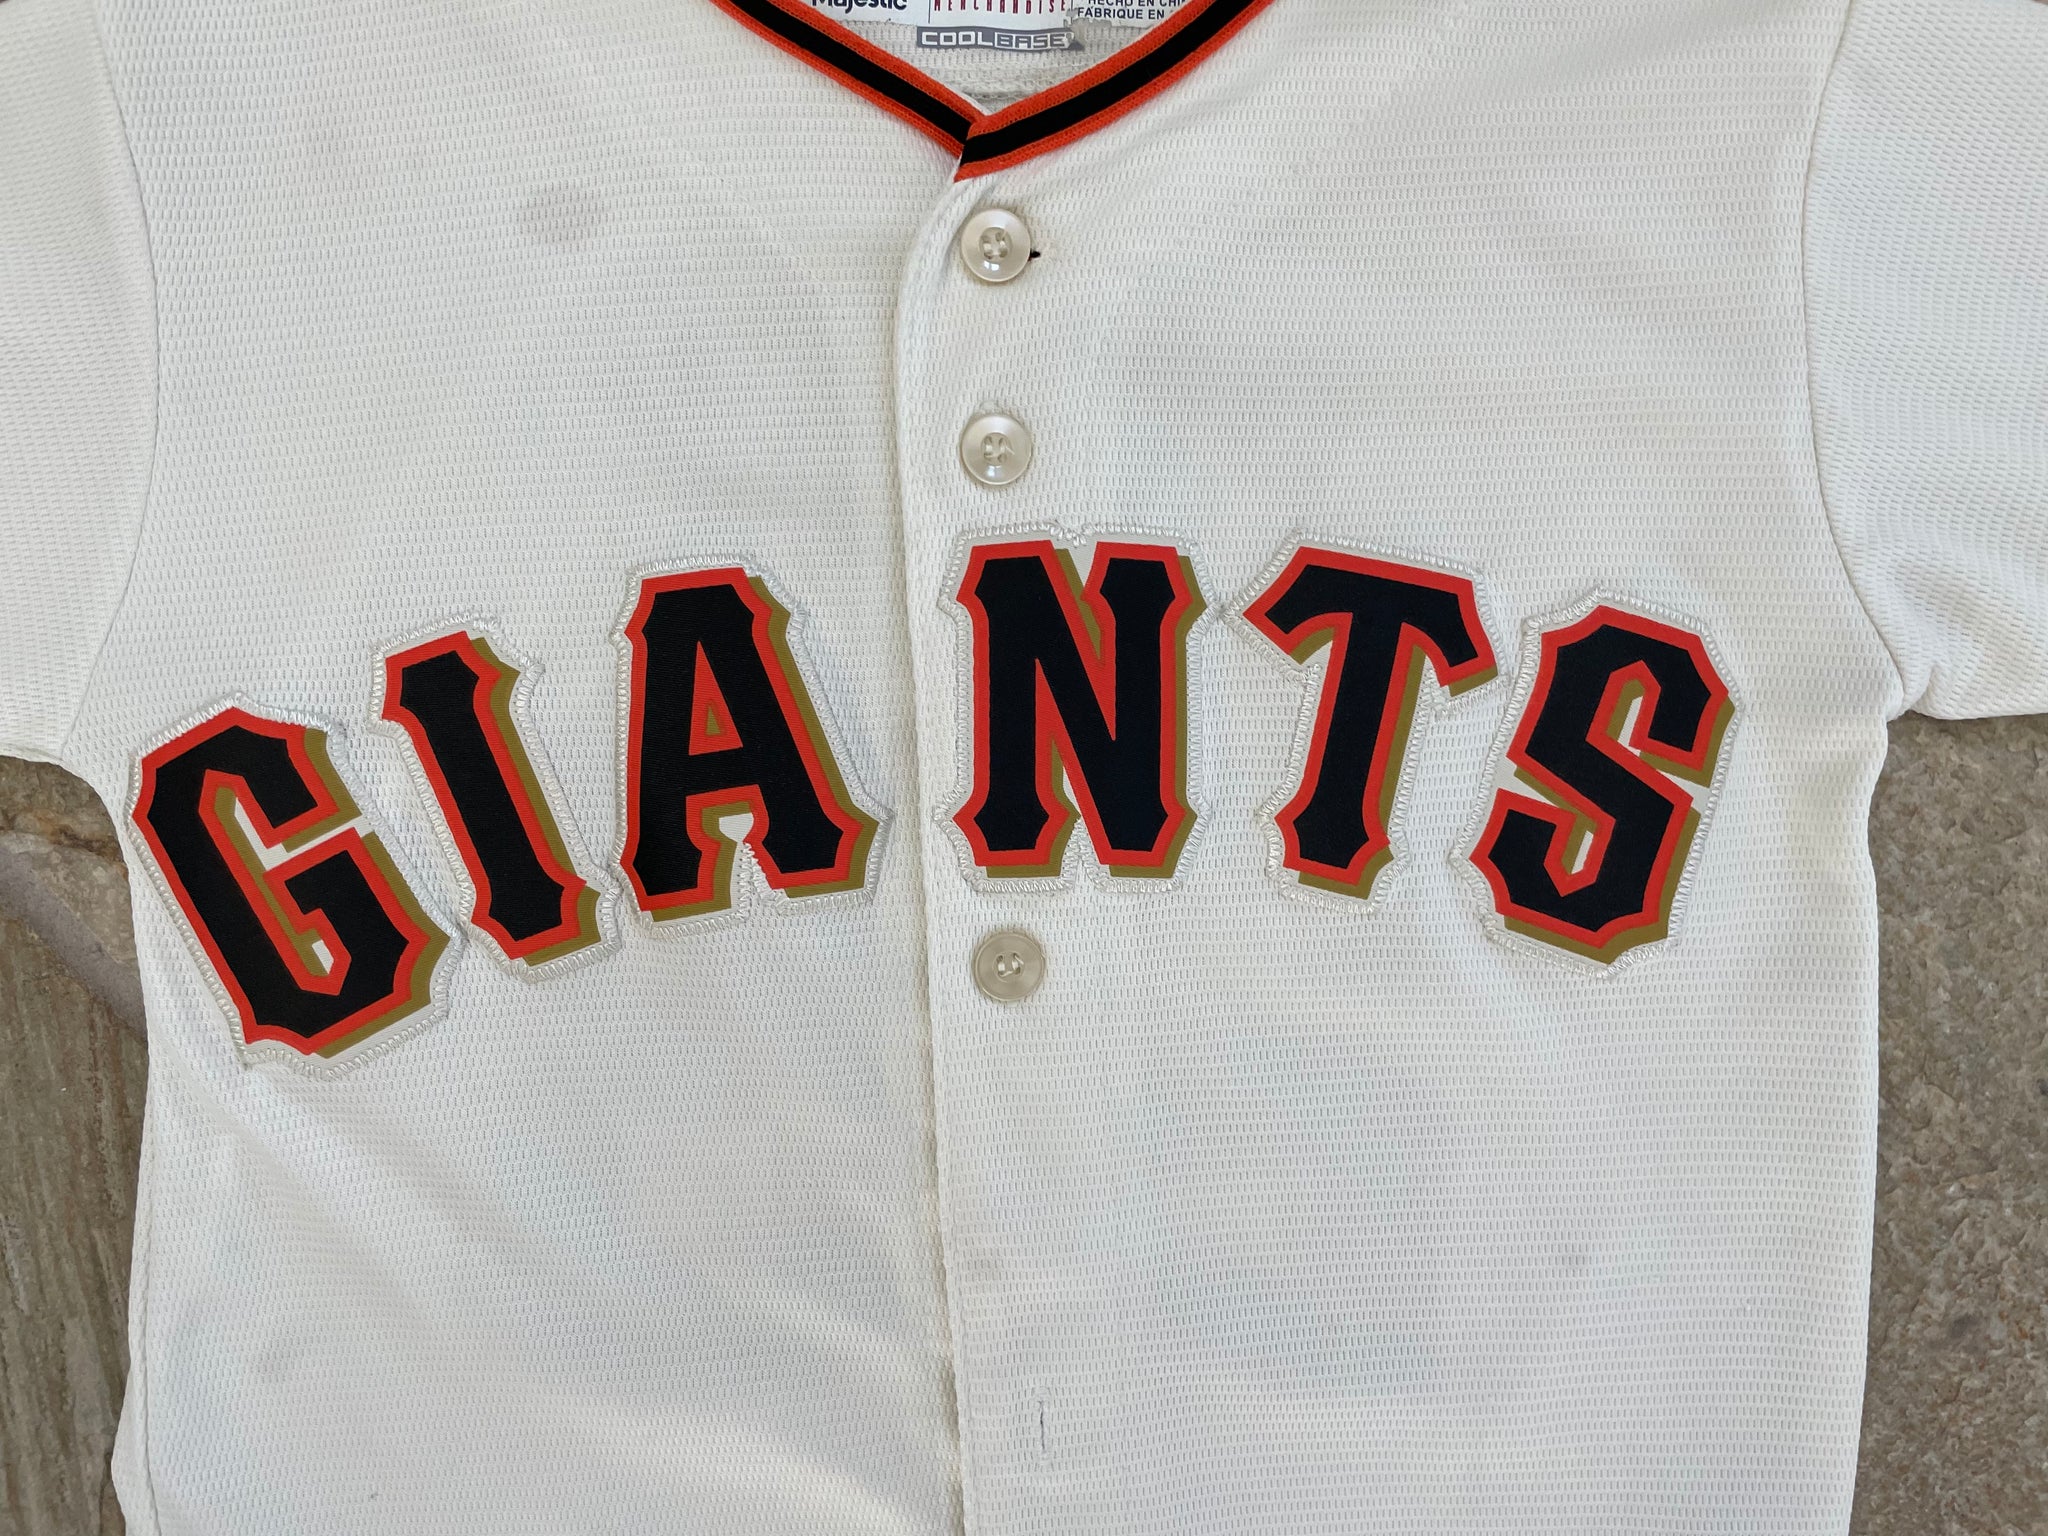 Buster Posey jersey - majestic - XL